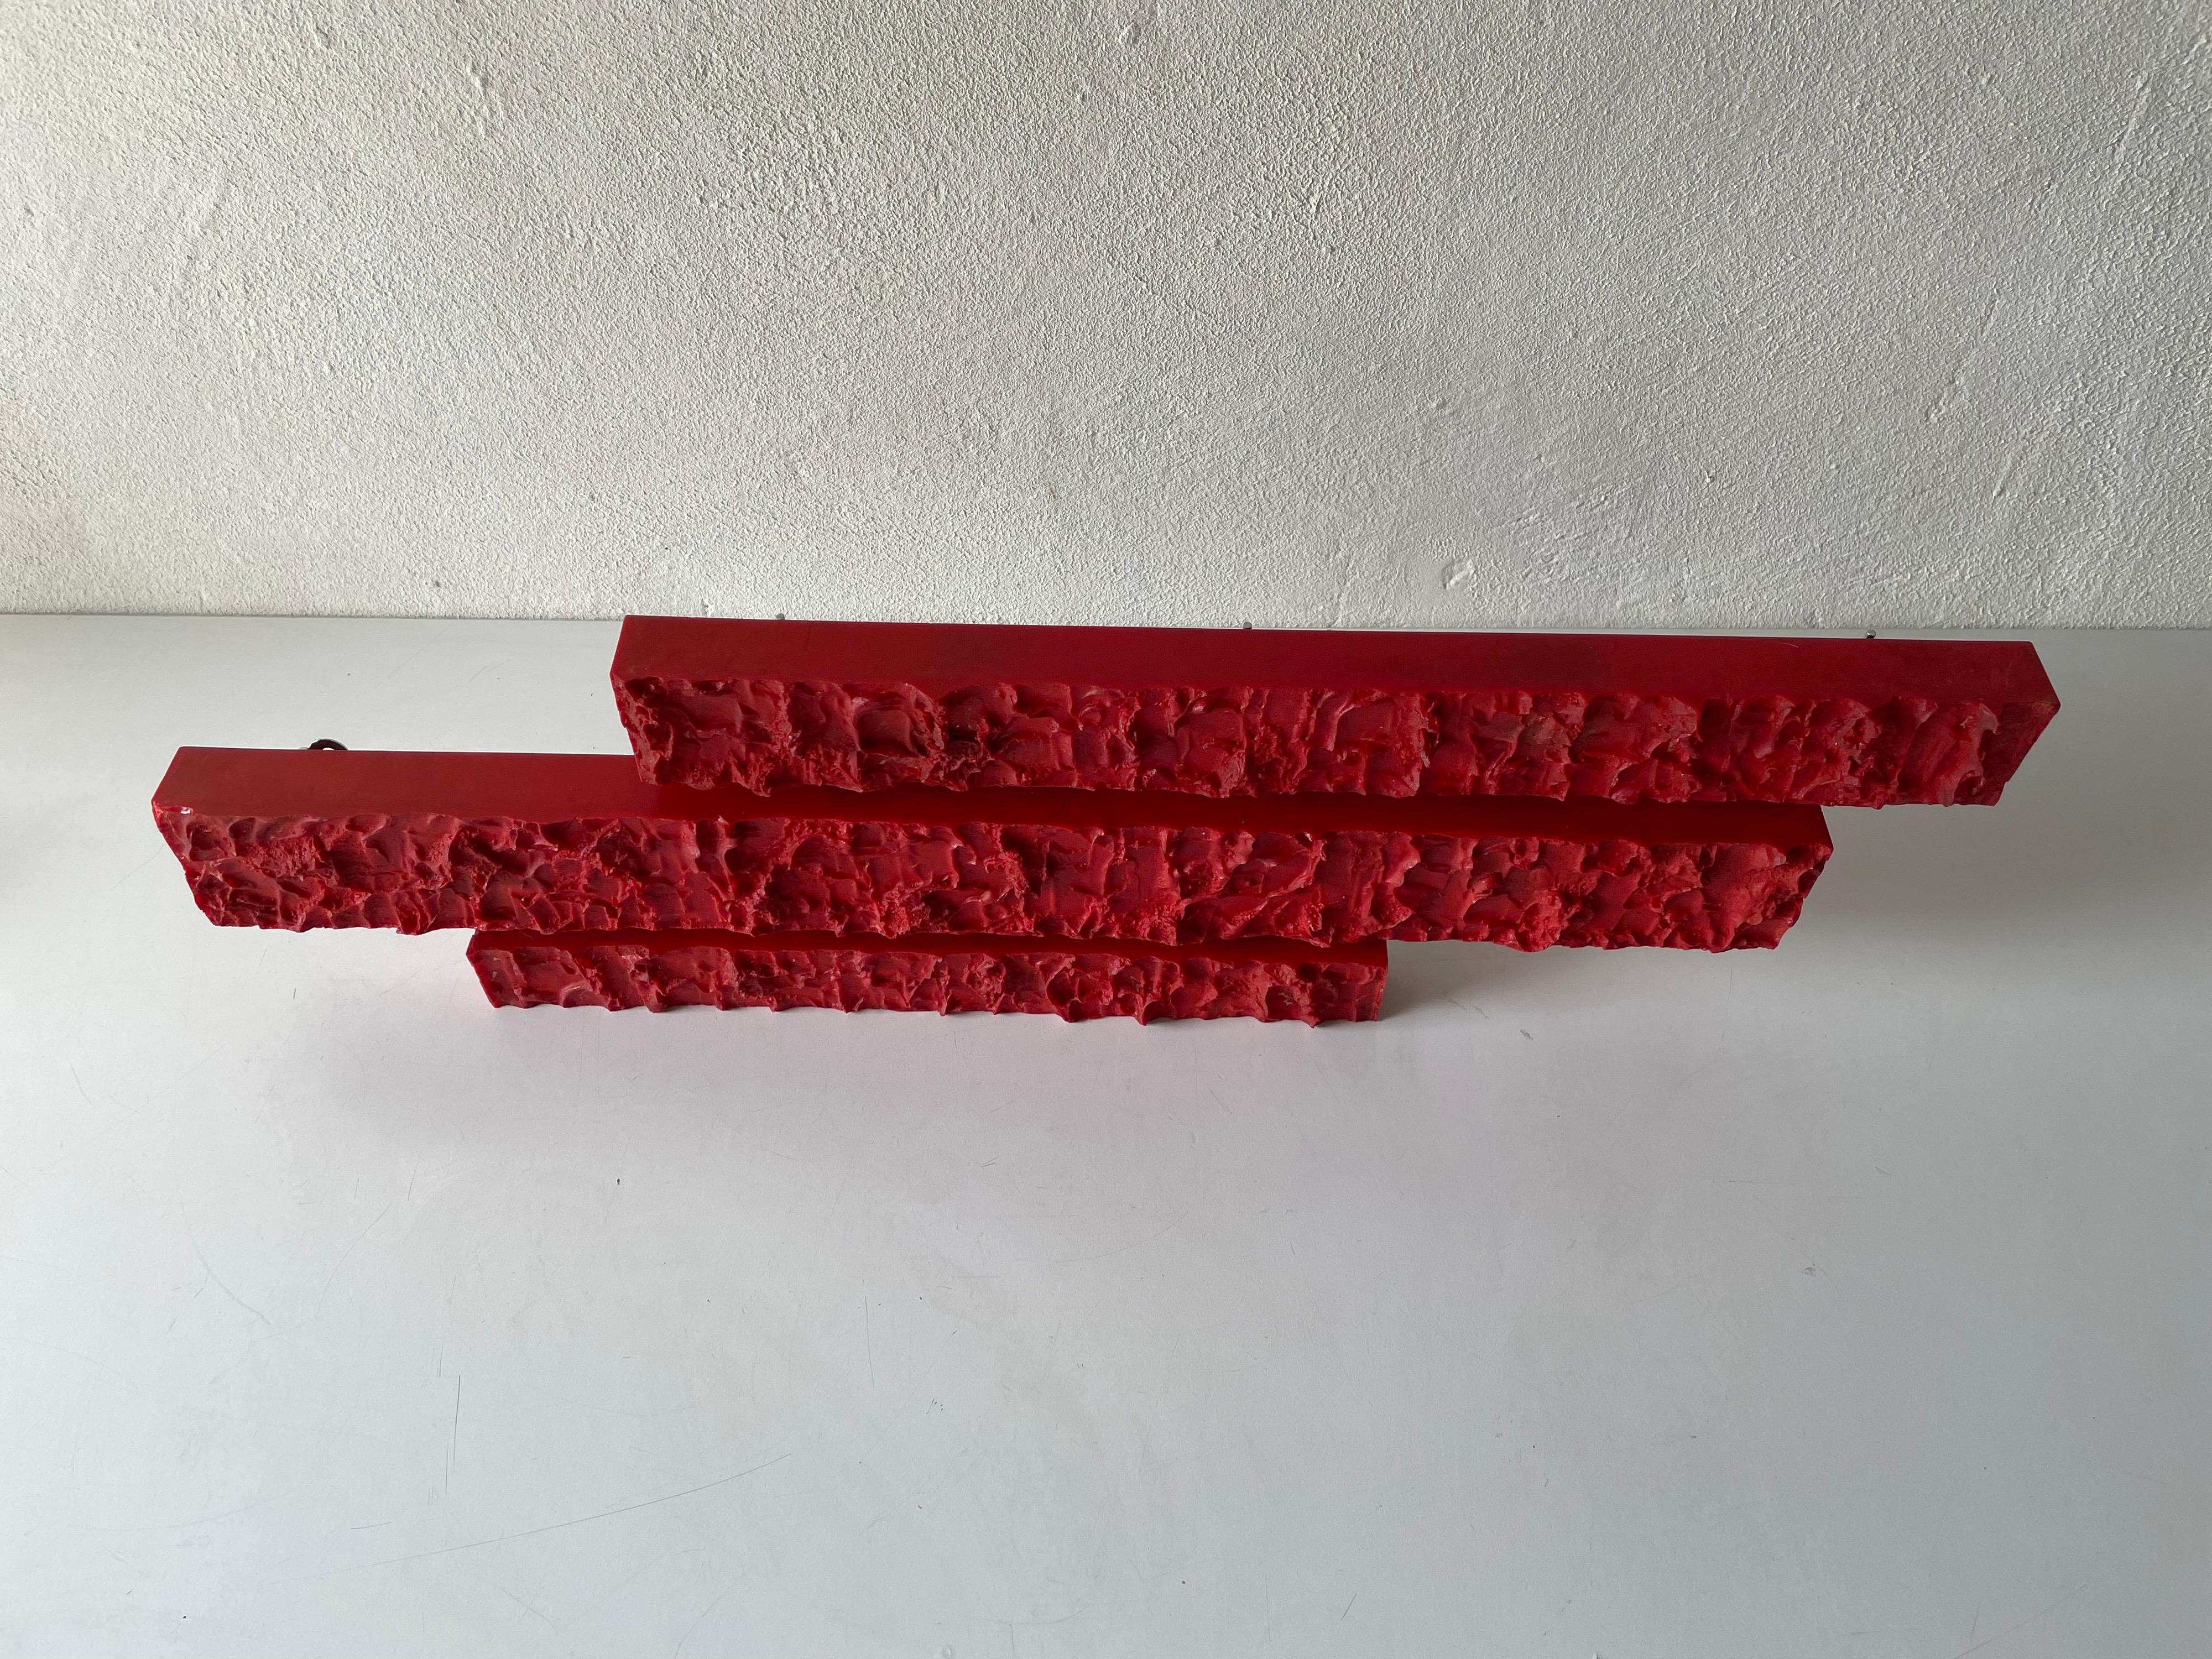 Textured Red Plastic Large Wall Lamp by Uwe Mersch Design, 1970s Germany For Sale 2